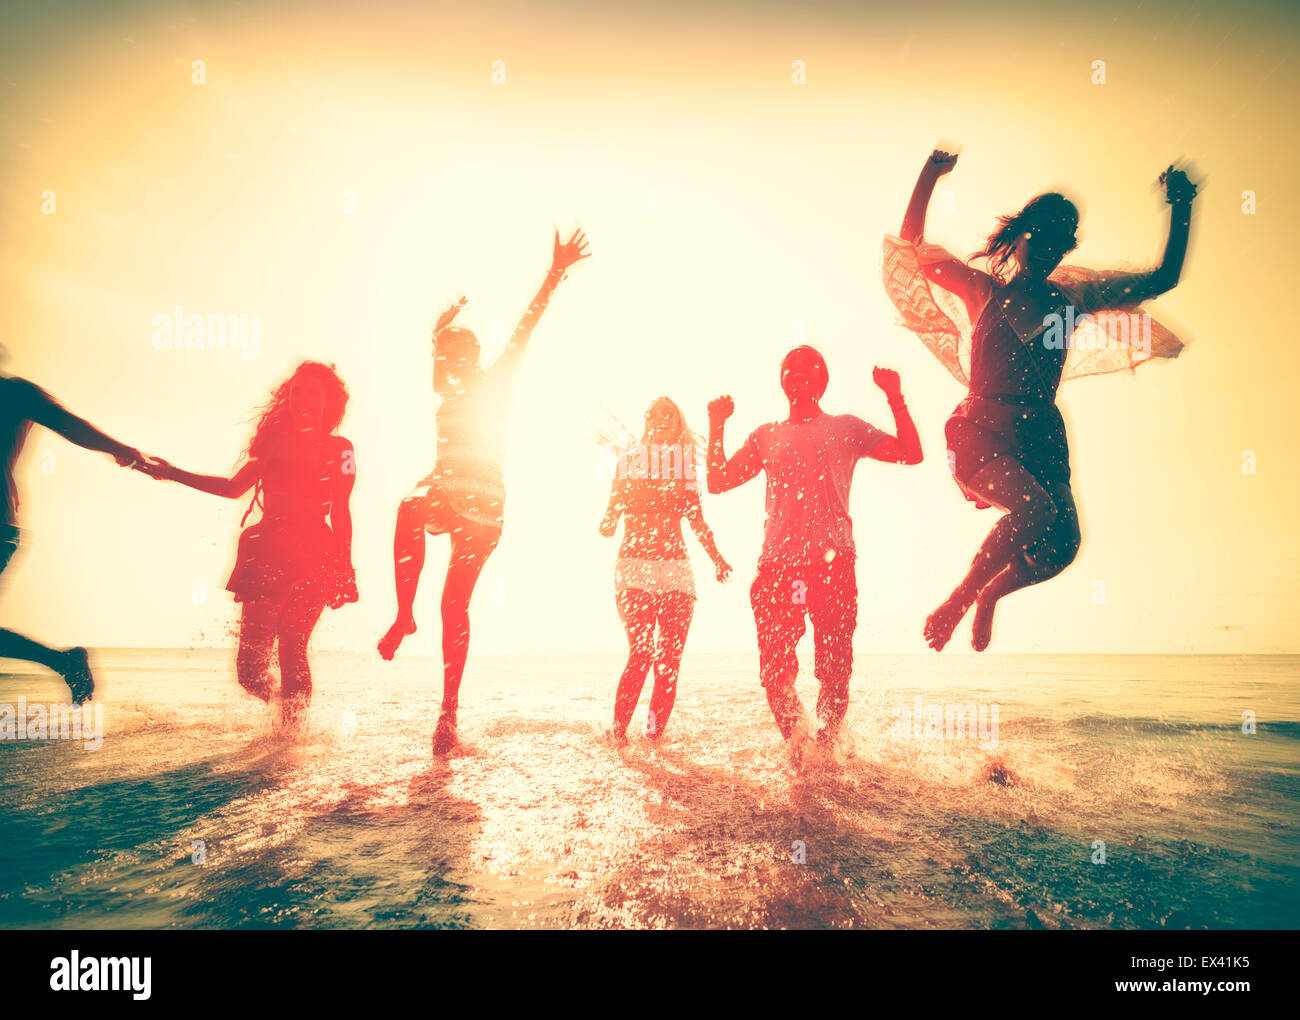 Friendship Freedom Beach Summer Holiday Concept Stock Photo